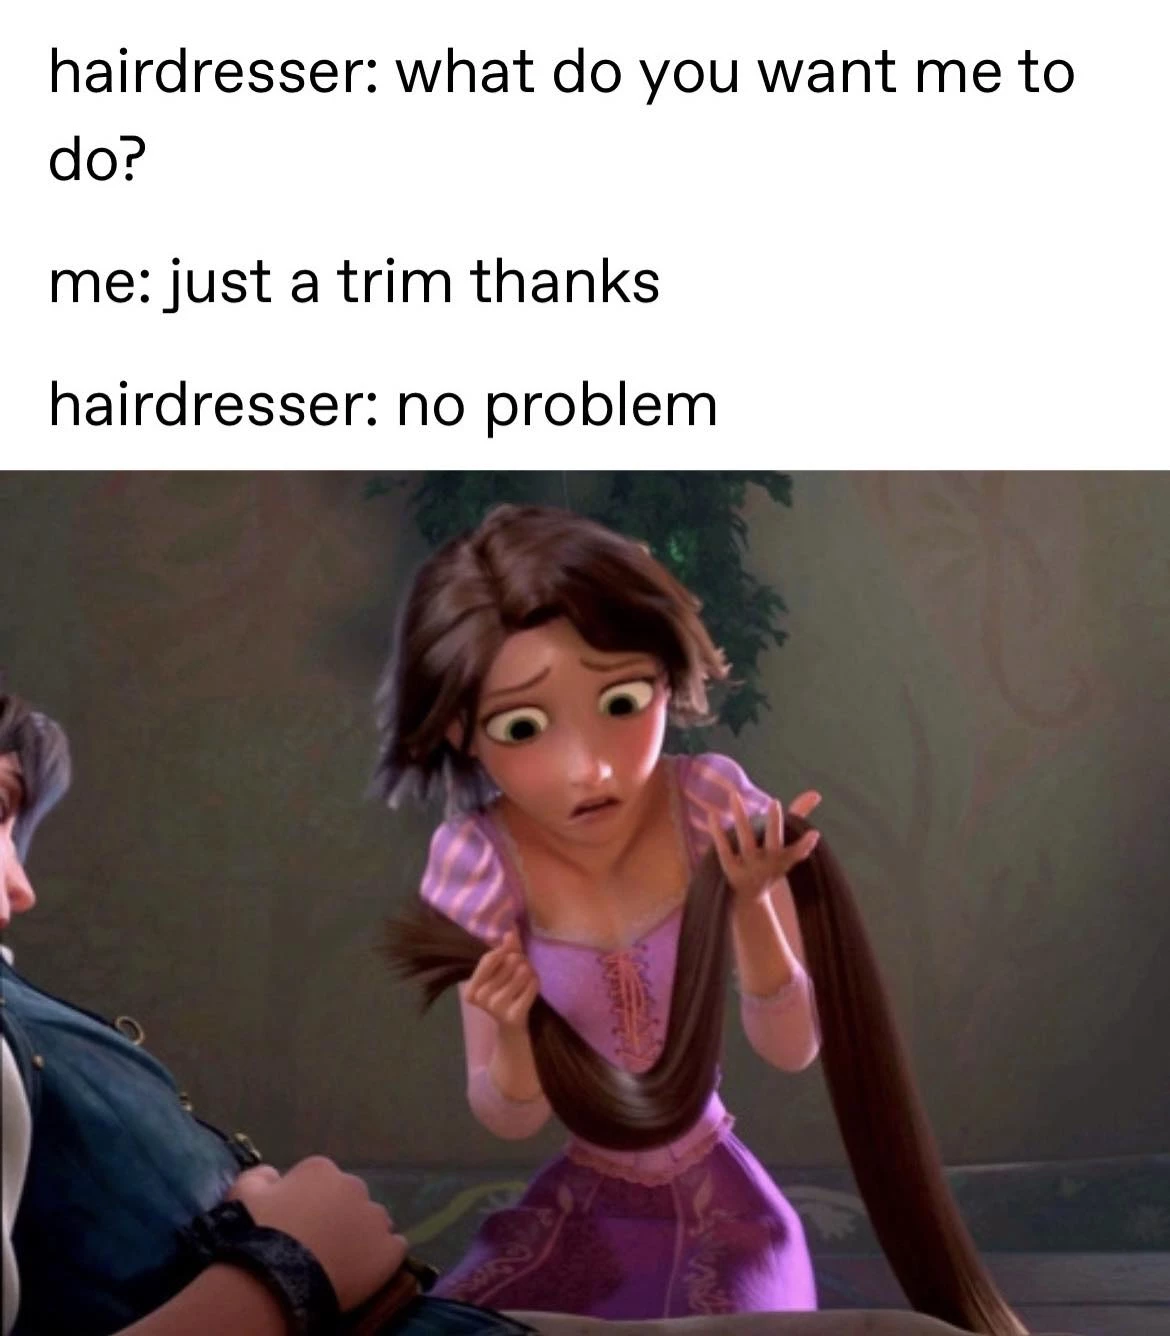 Instead Of A New Hairstyle, Maybe I Need A New Hairdresser